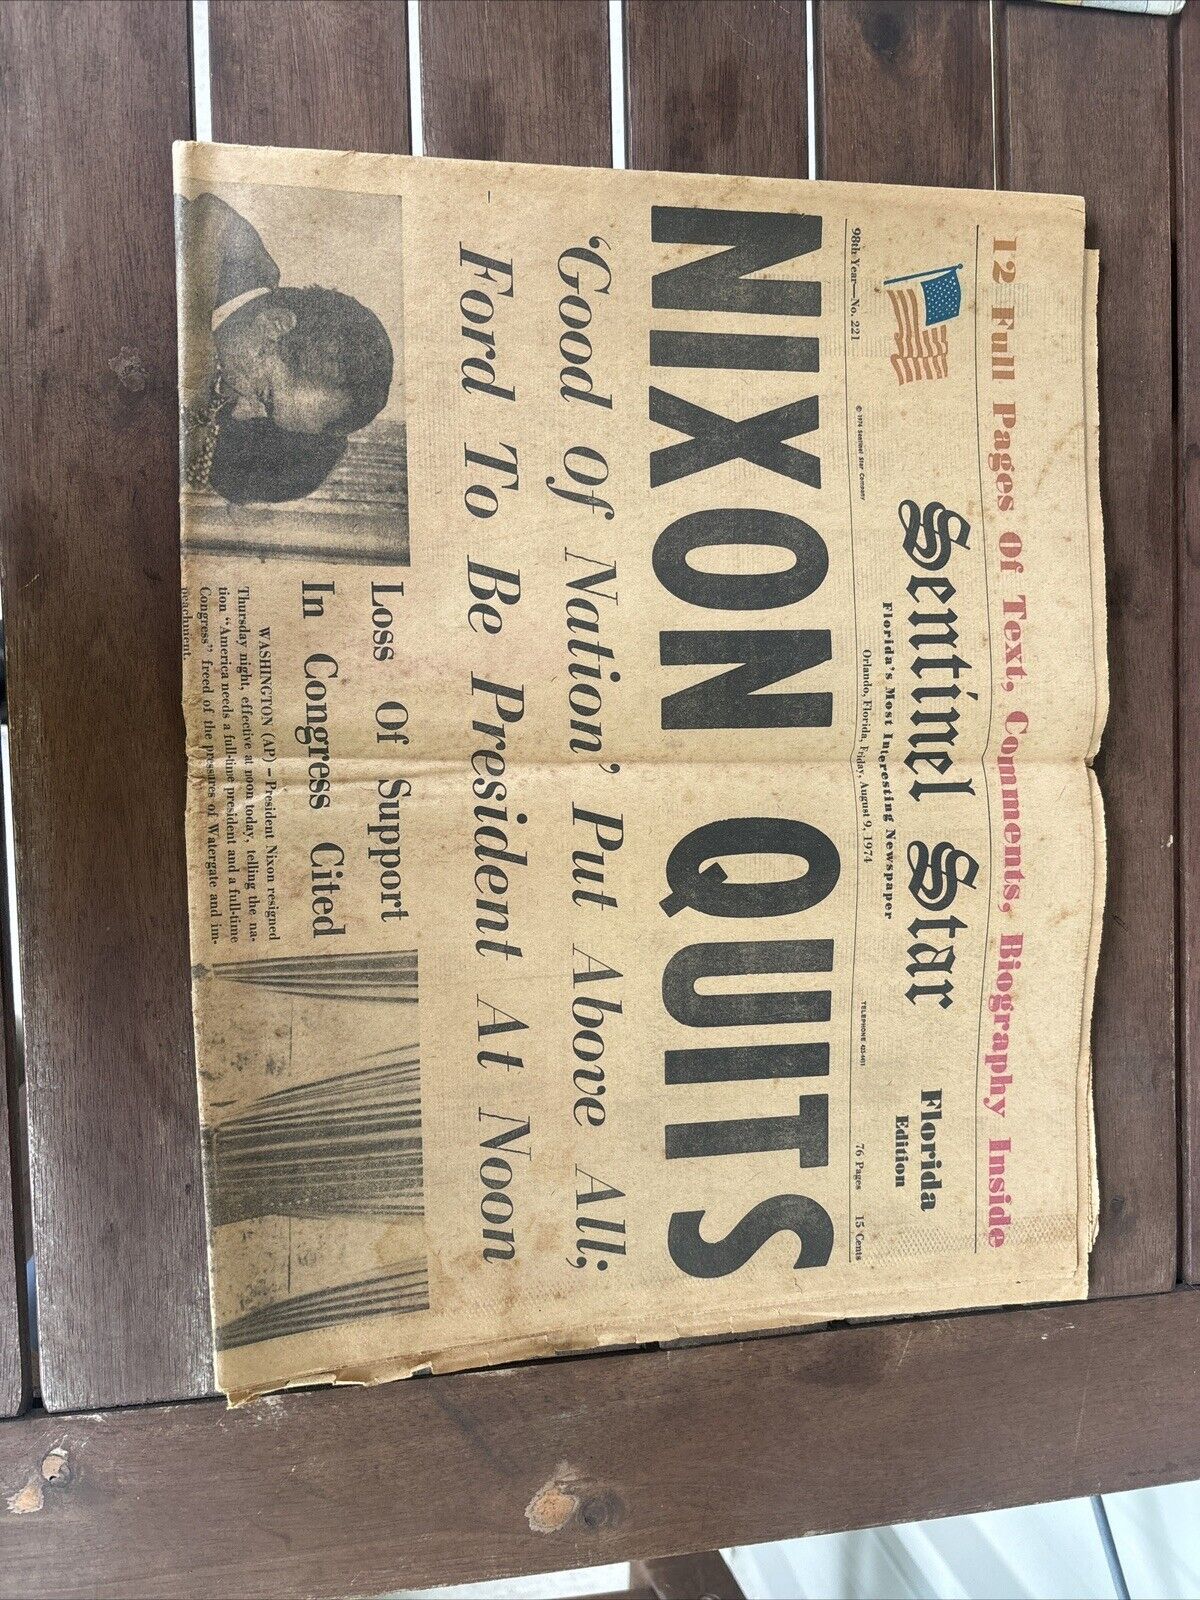 1974 Sentinel Star Front Page “NIXON QUITS” 12 Page Section Of Newspaper